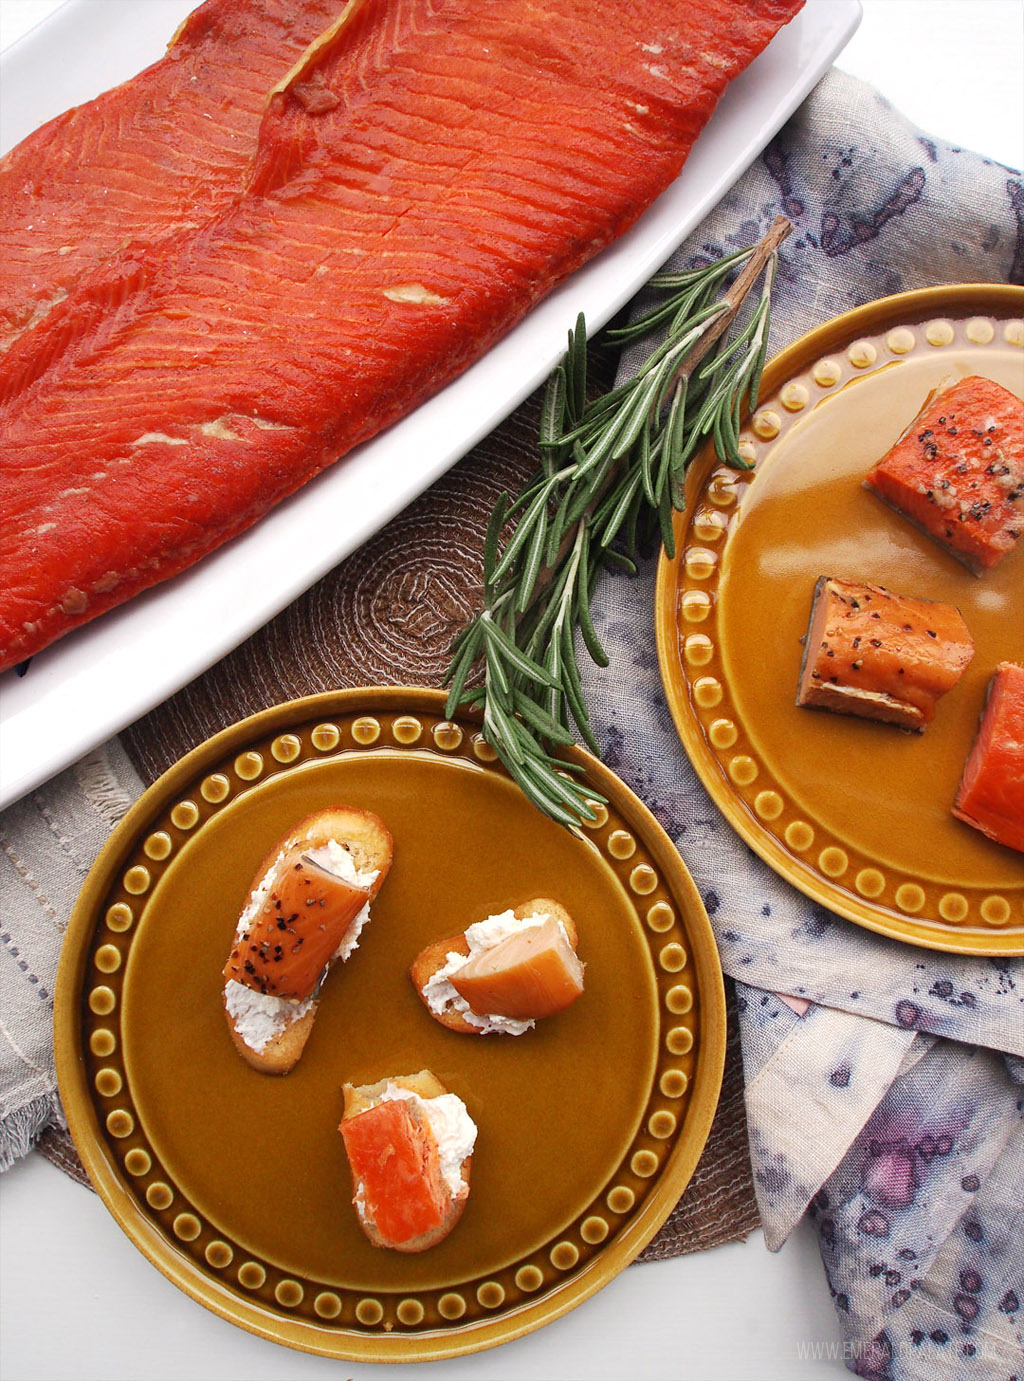 platter and plates of smoked salmon from Seattle